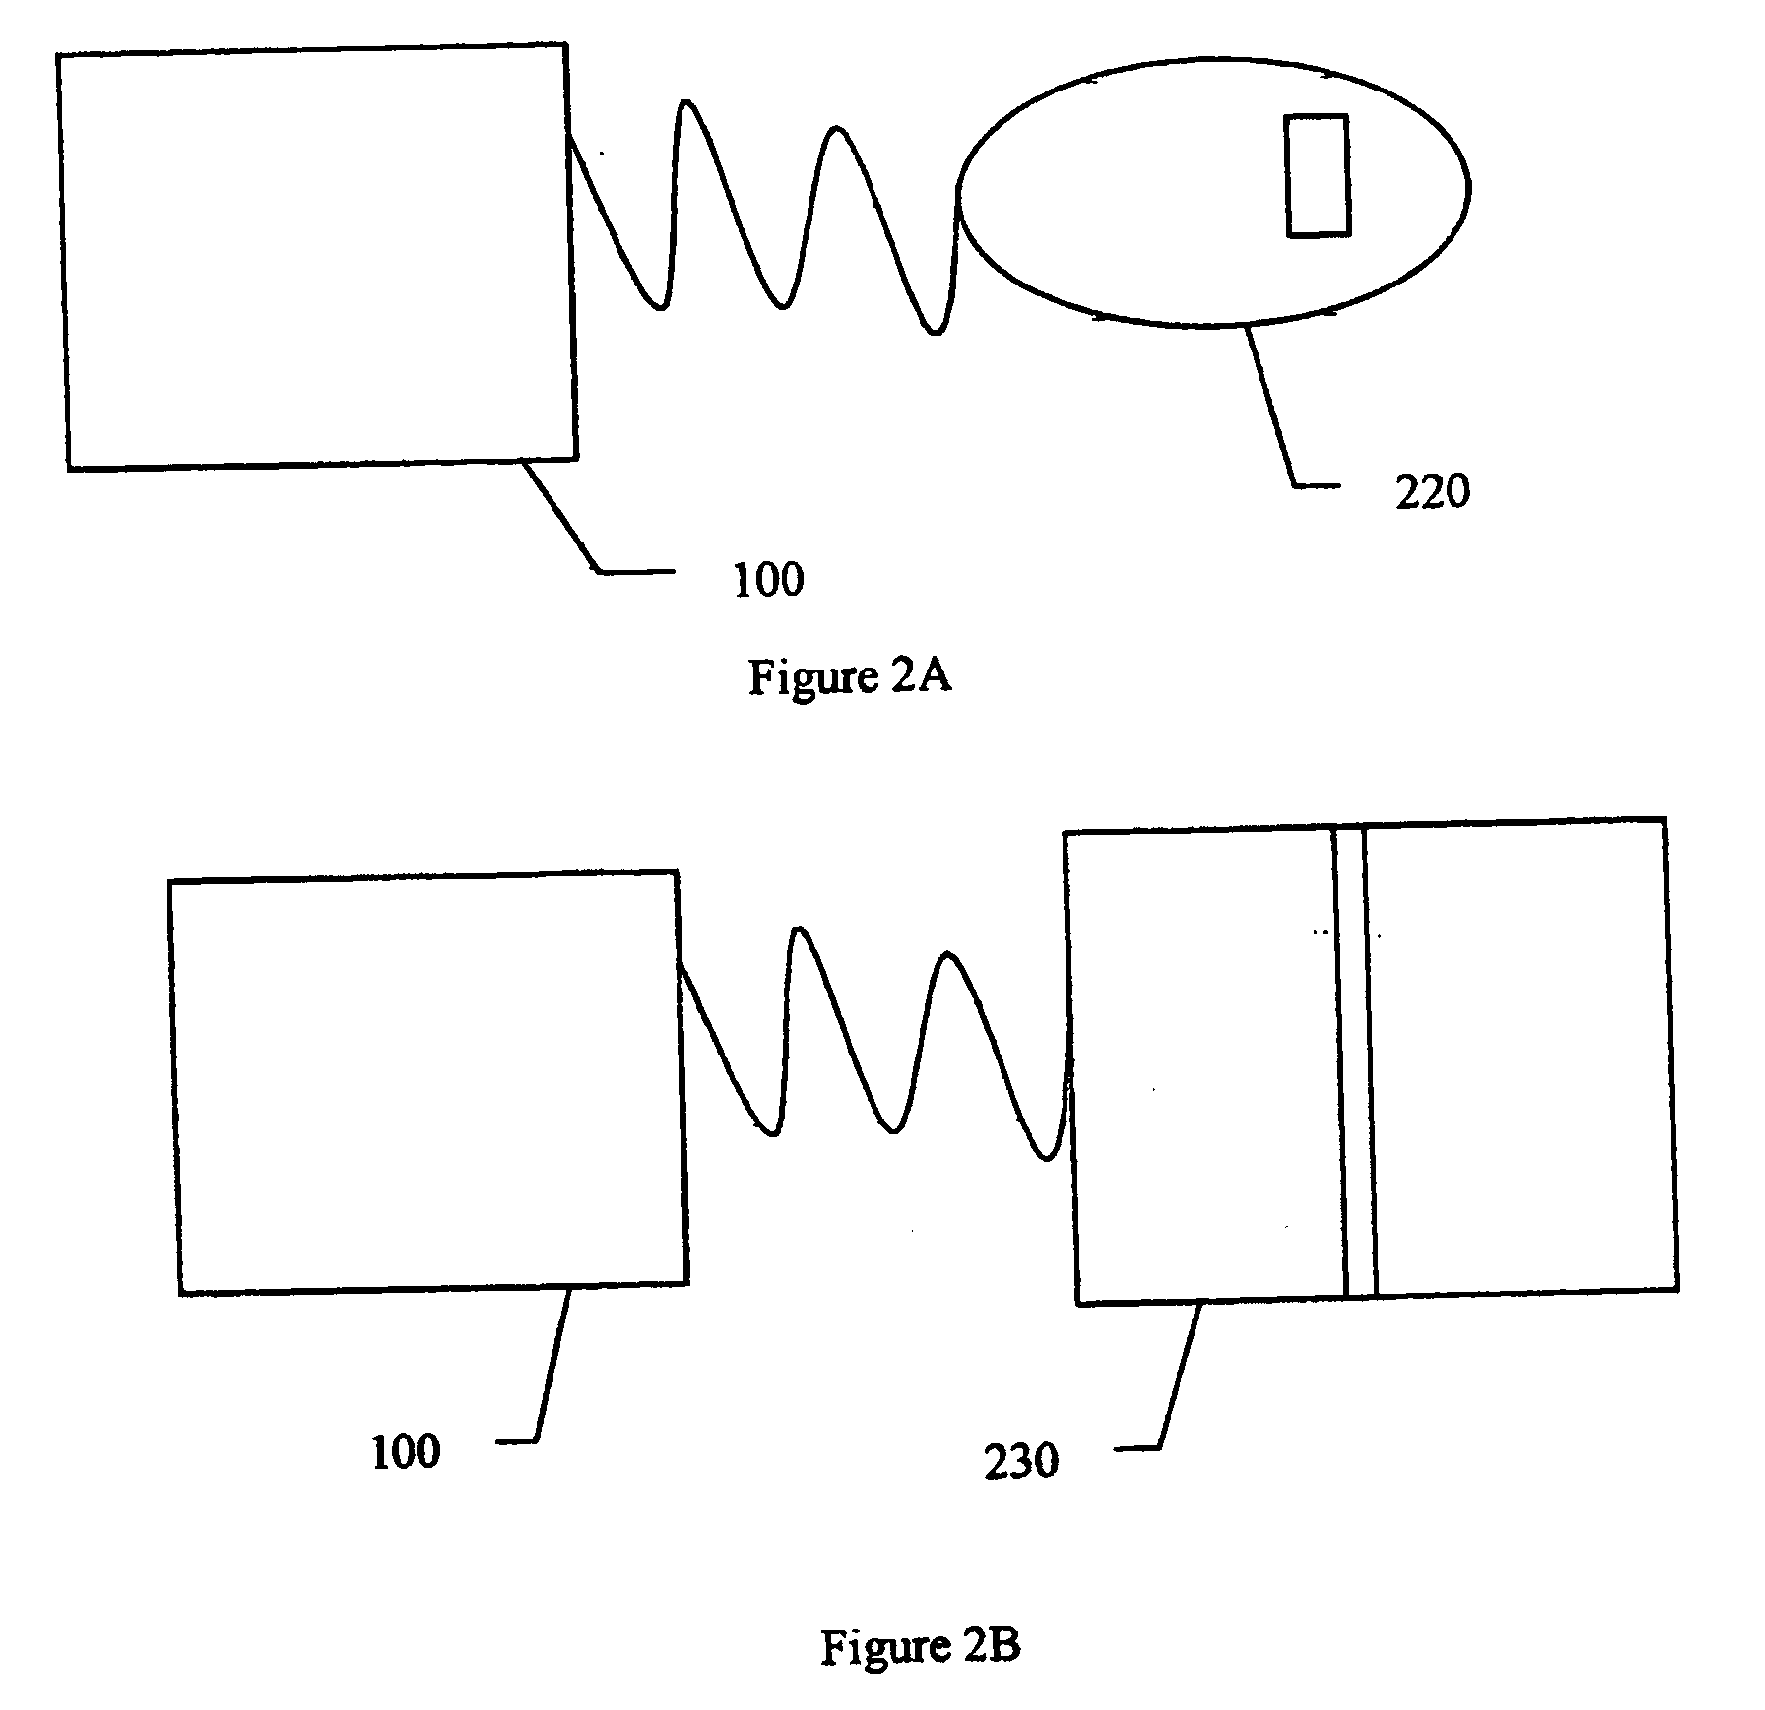 Biometric identification device and methods for secure transactions